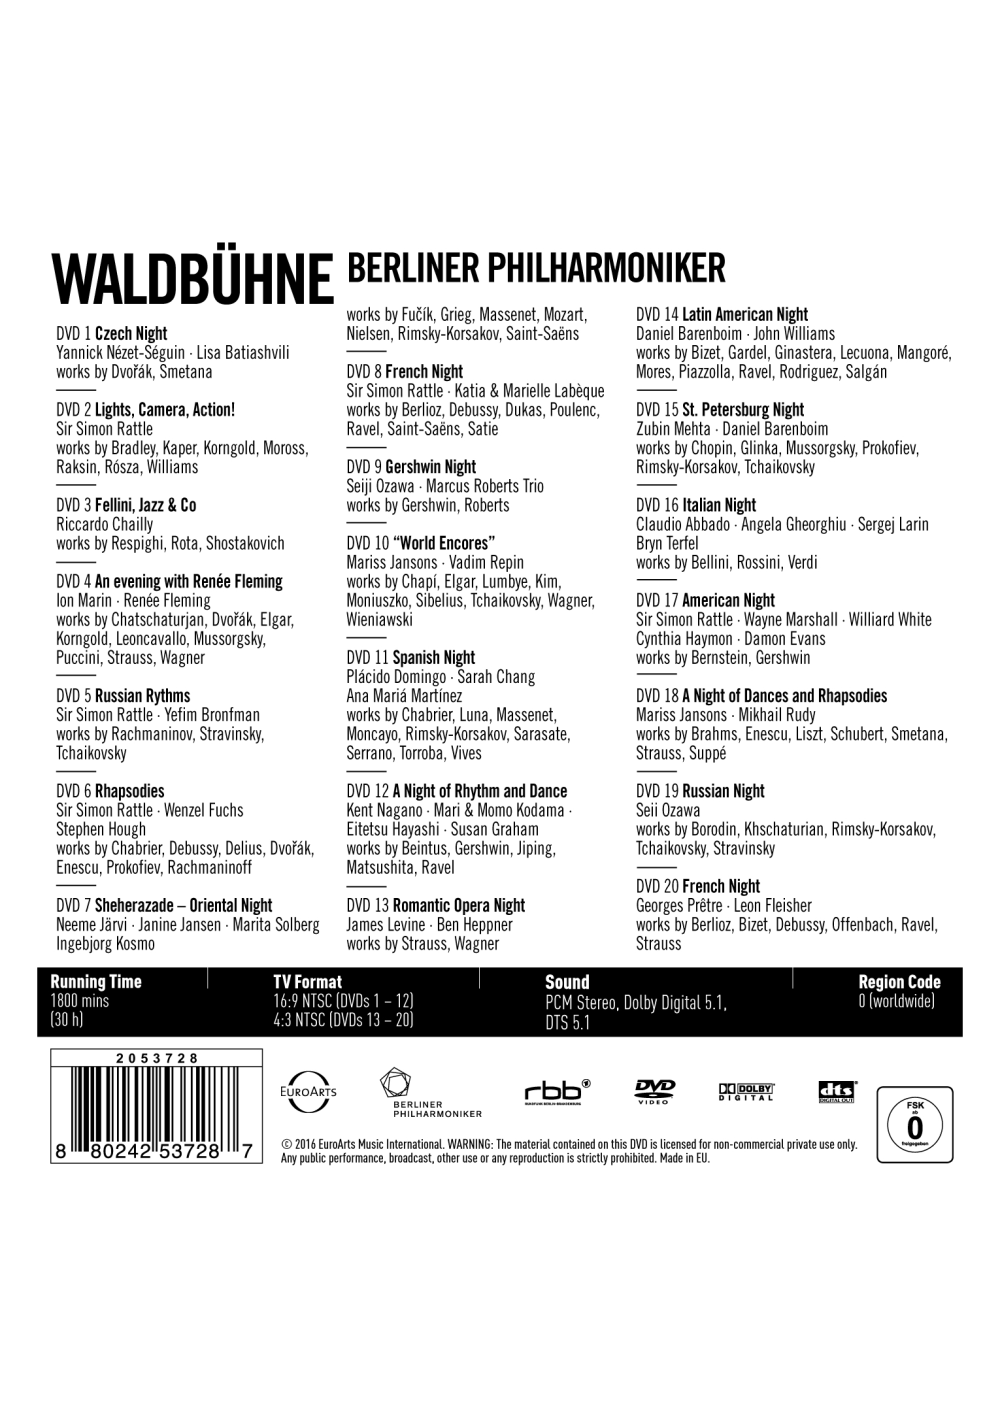 Waldbühne – 20-DVD BOX – 20 Concerts between 1992 and 2016 - EUROARTS